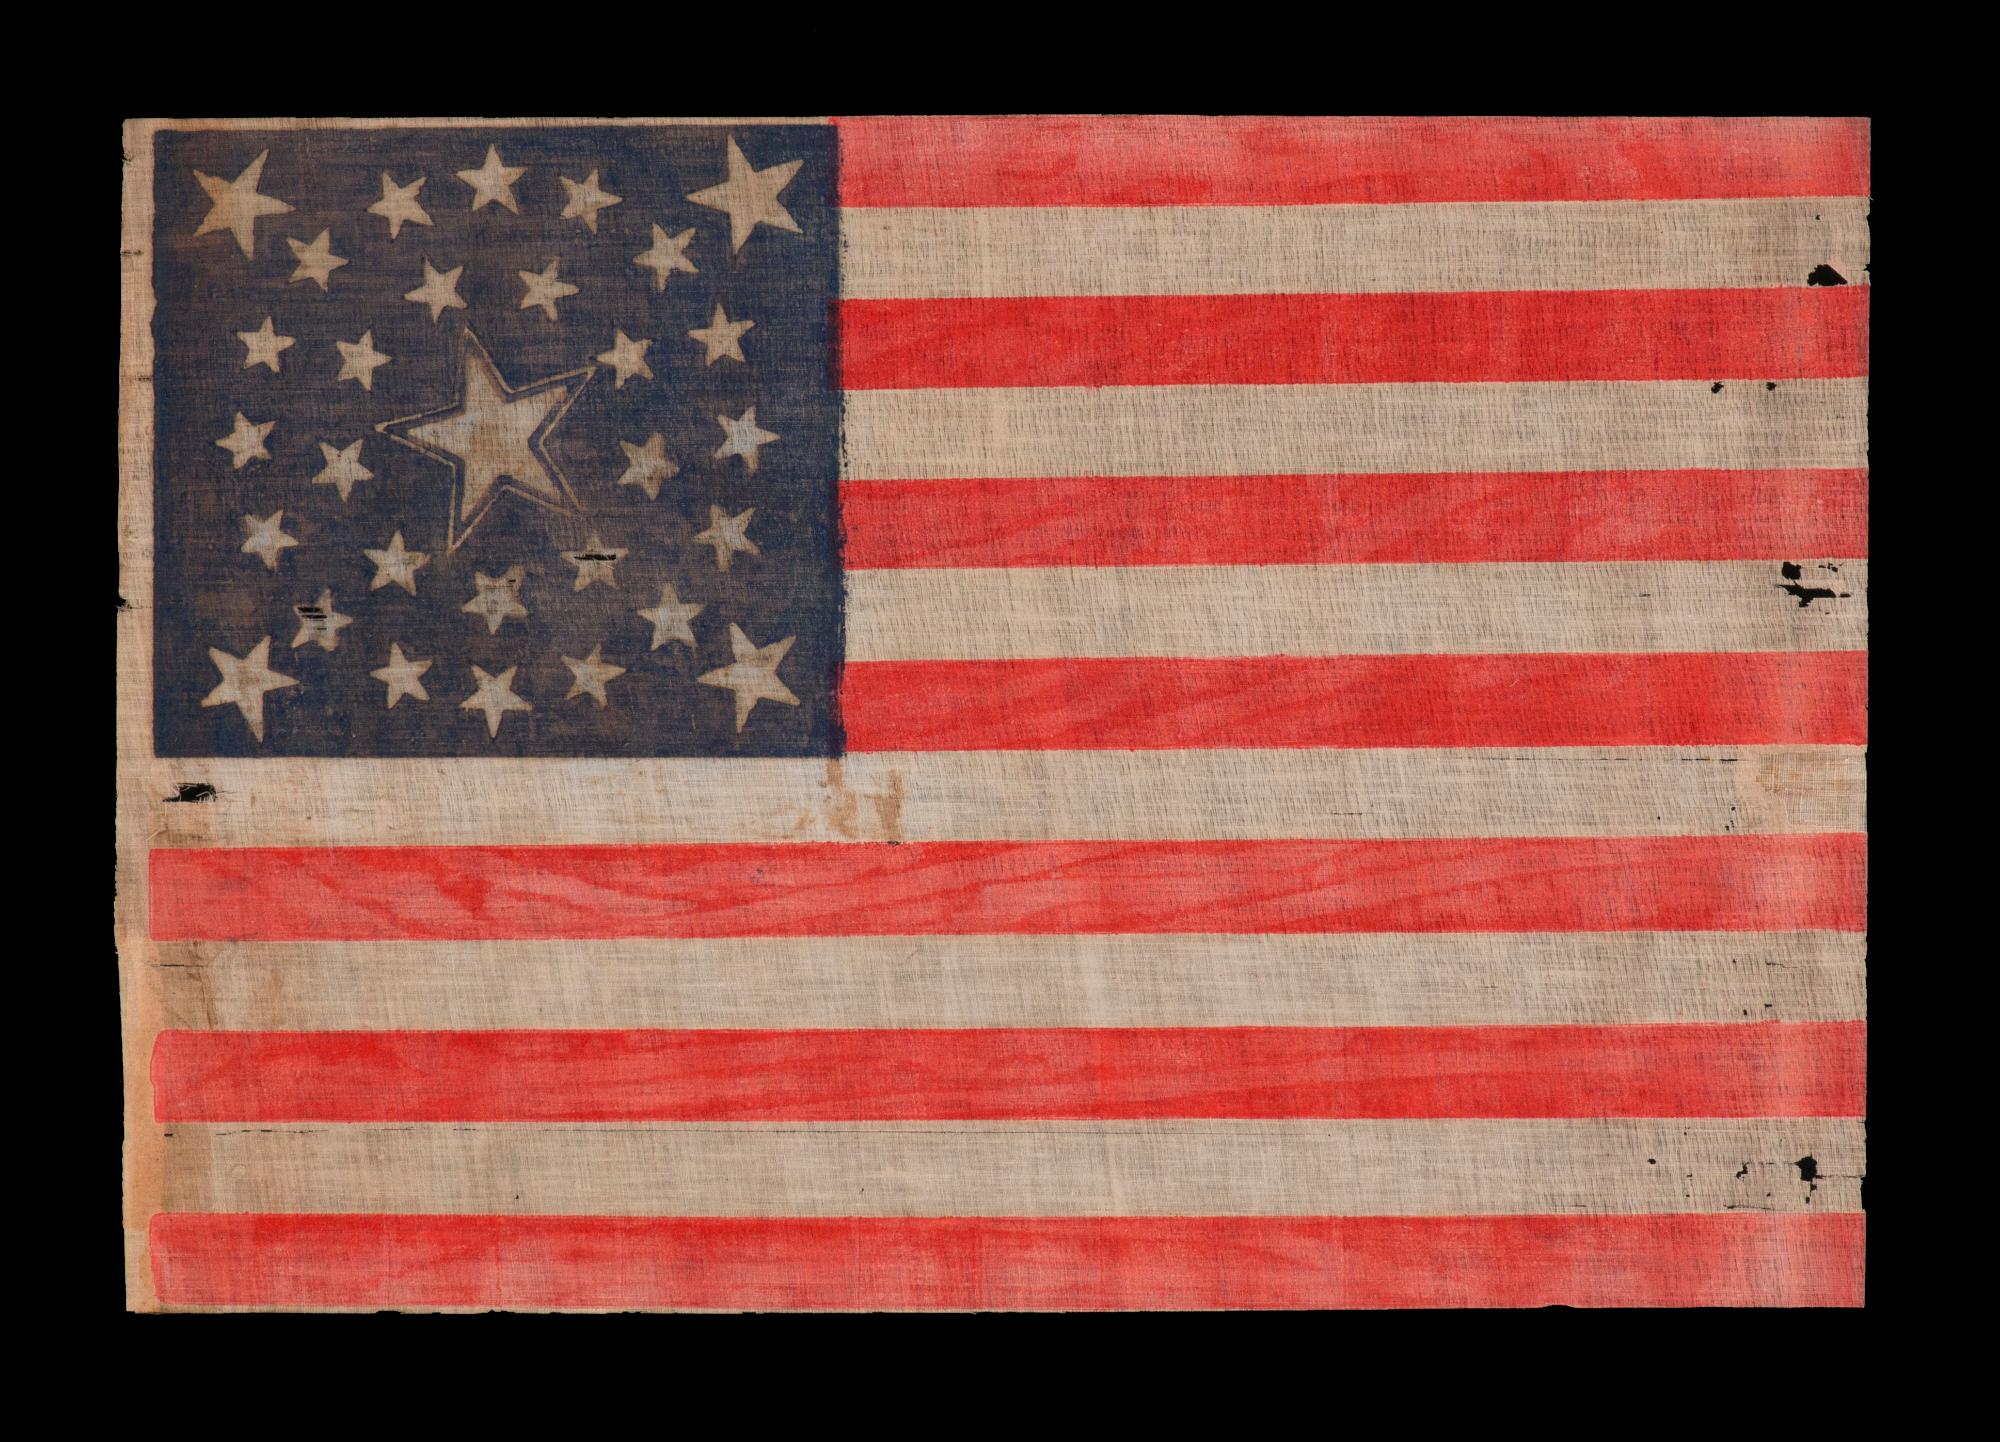 30 STAR FLAG OF THE PRE-CIVIL WAR ERA, A RARE AND BEAUTIFUL ANTIQUE EXAMPLE WITH A DOUBLE-WREATH CONFIGURATION THAT FEATURES A LARGE, HALOED CENTER STAR, WISCONSIN STATEHOOD, 1848-1850:

30 star American parade flag, block-printed on coarse cotton,